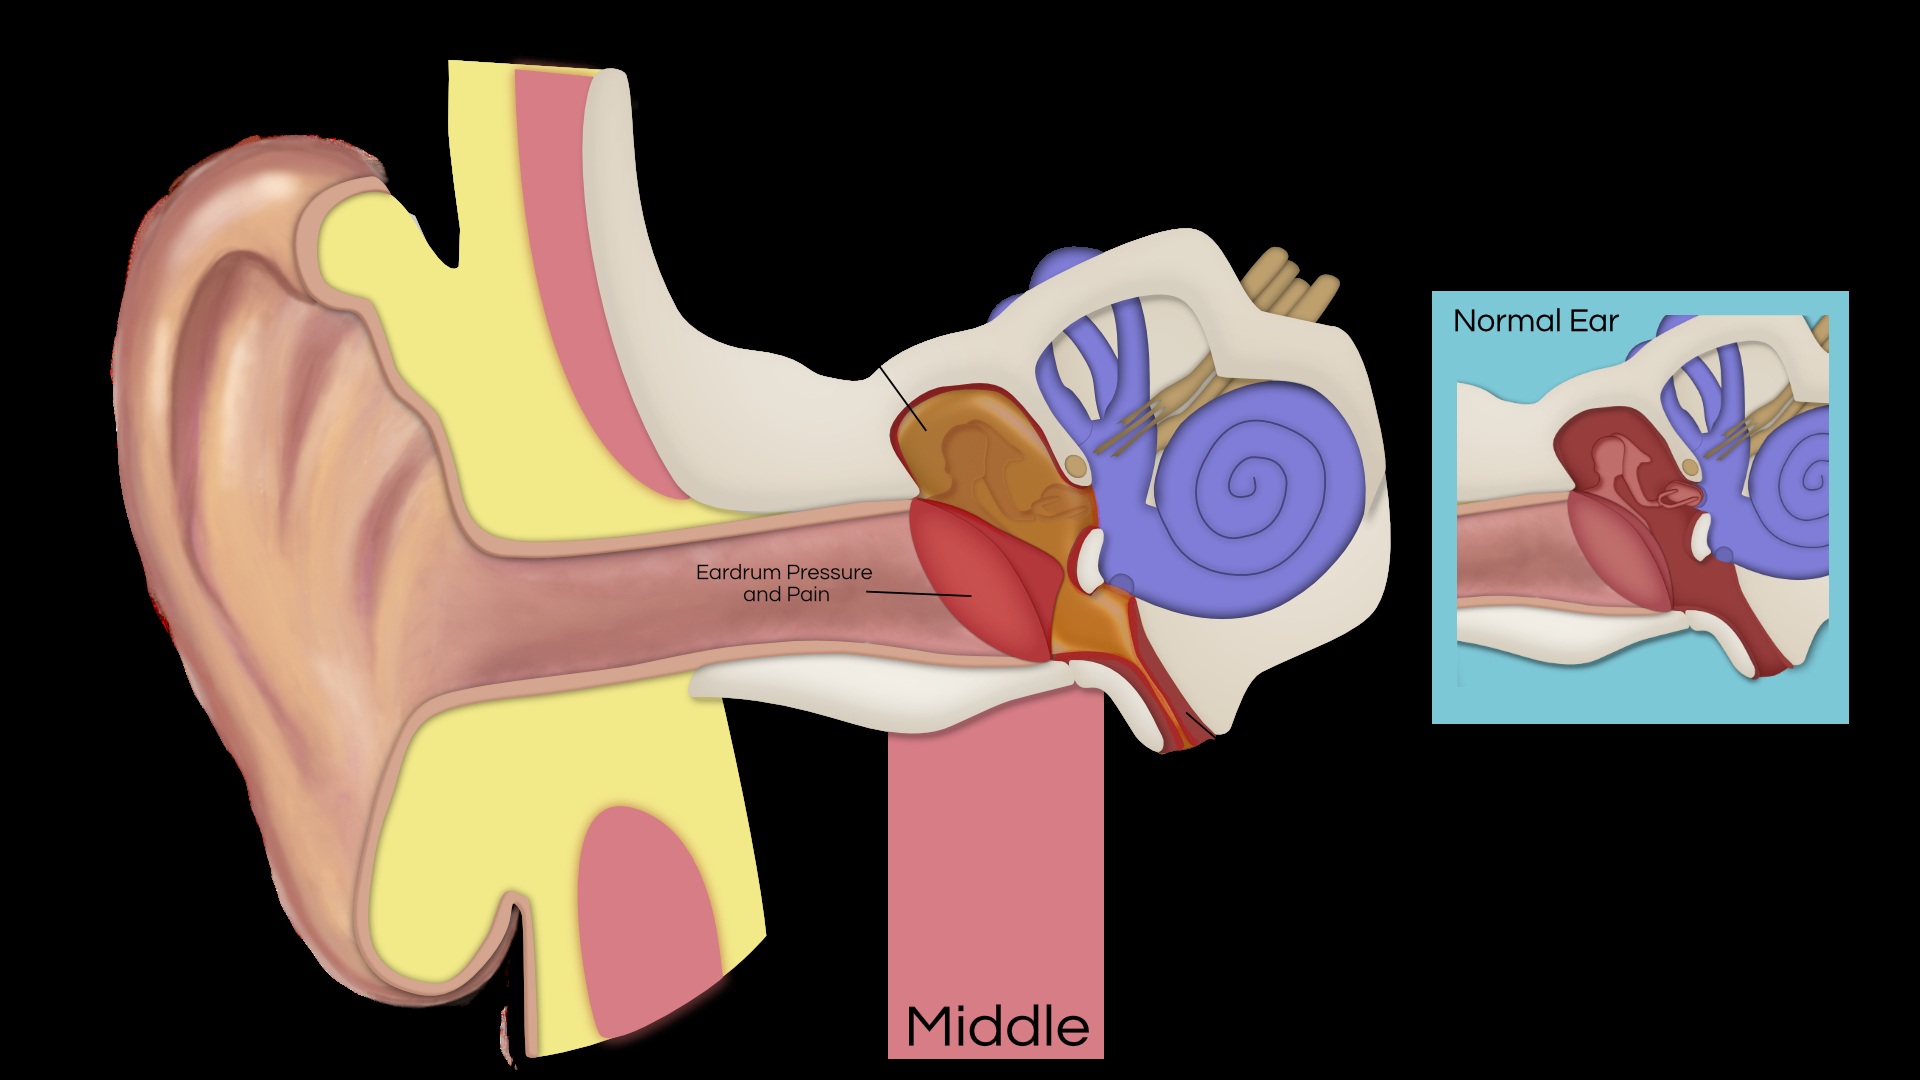 Ear Infection Diagram Ear Infections Ear Institute Of Texas And Voice Swallowing